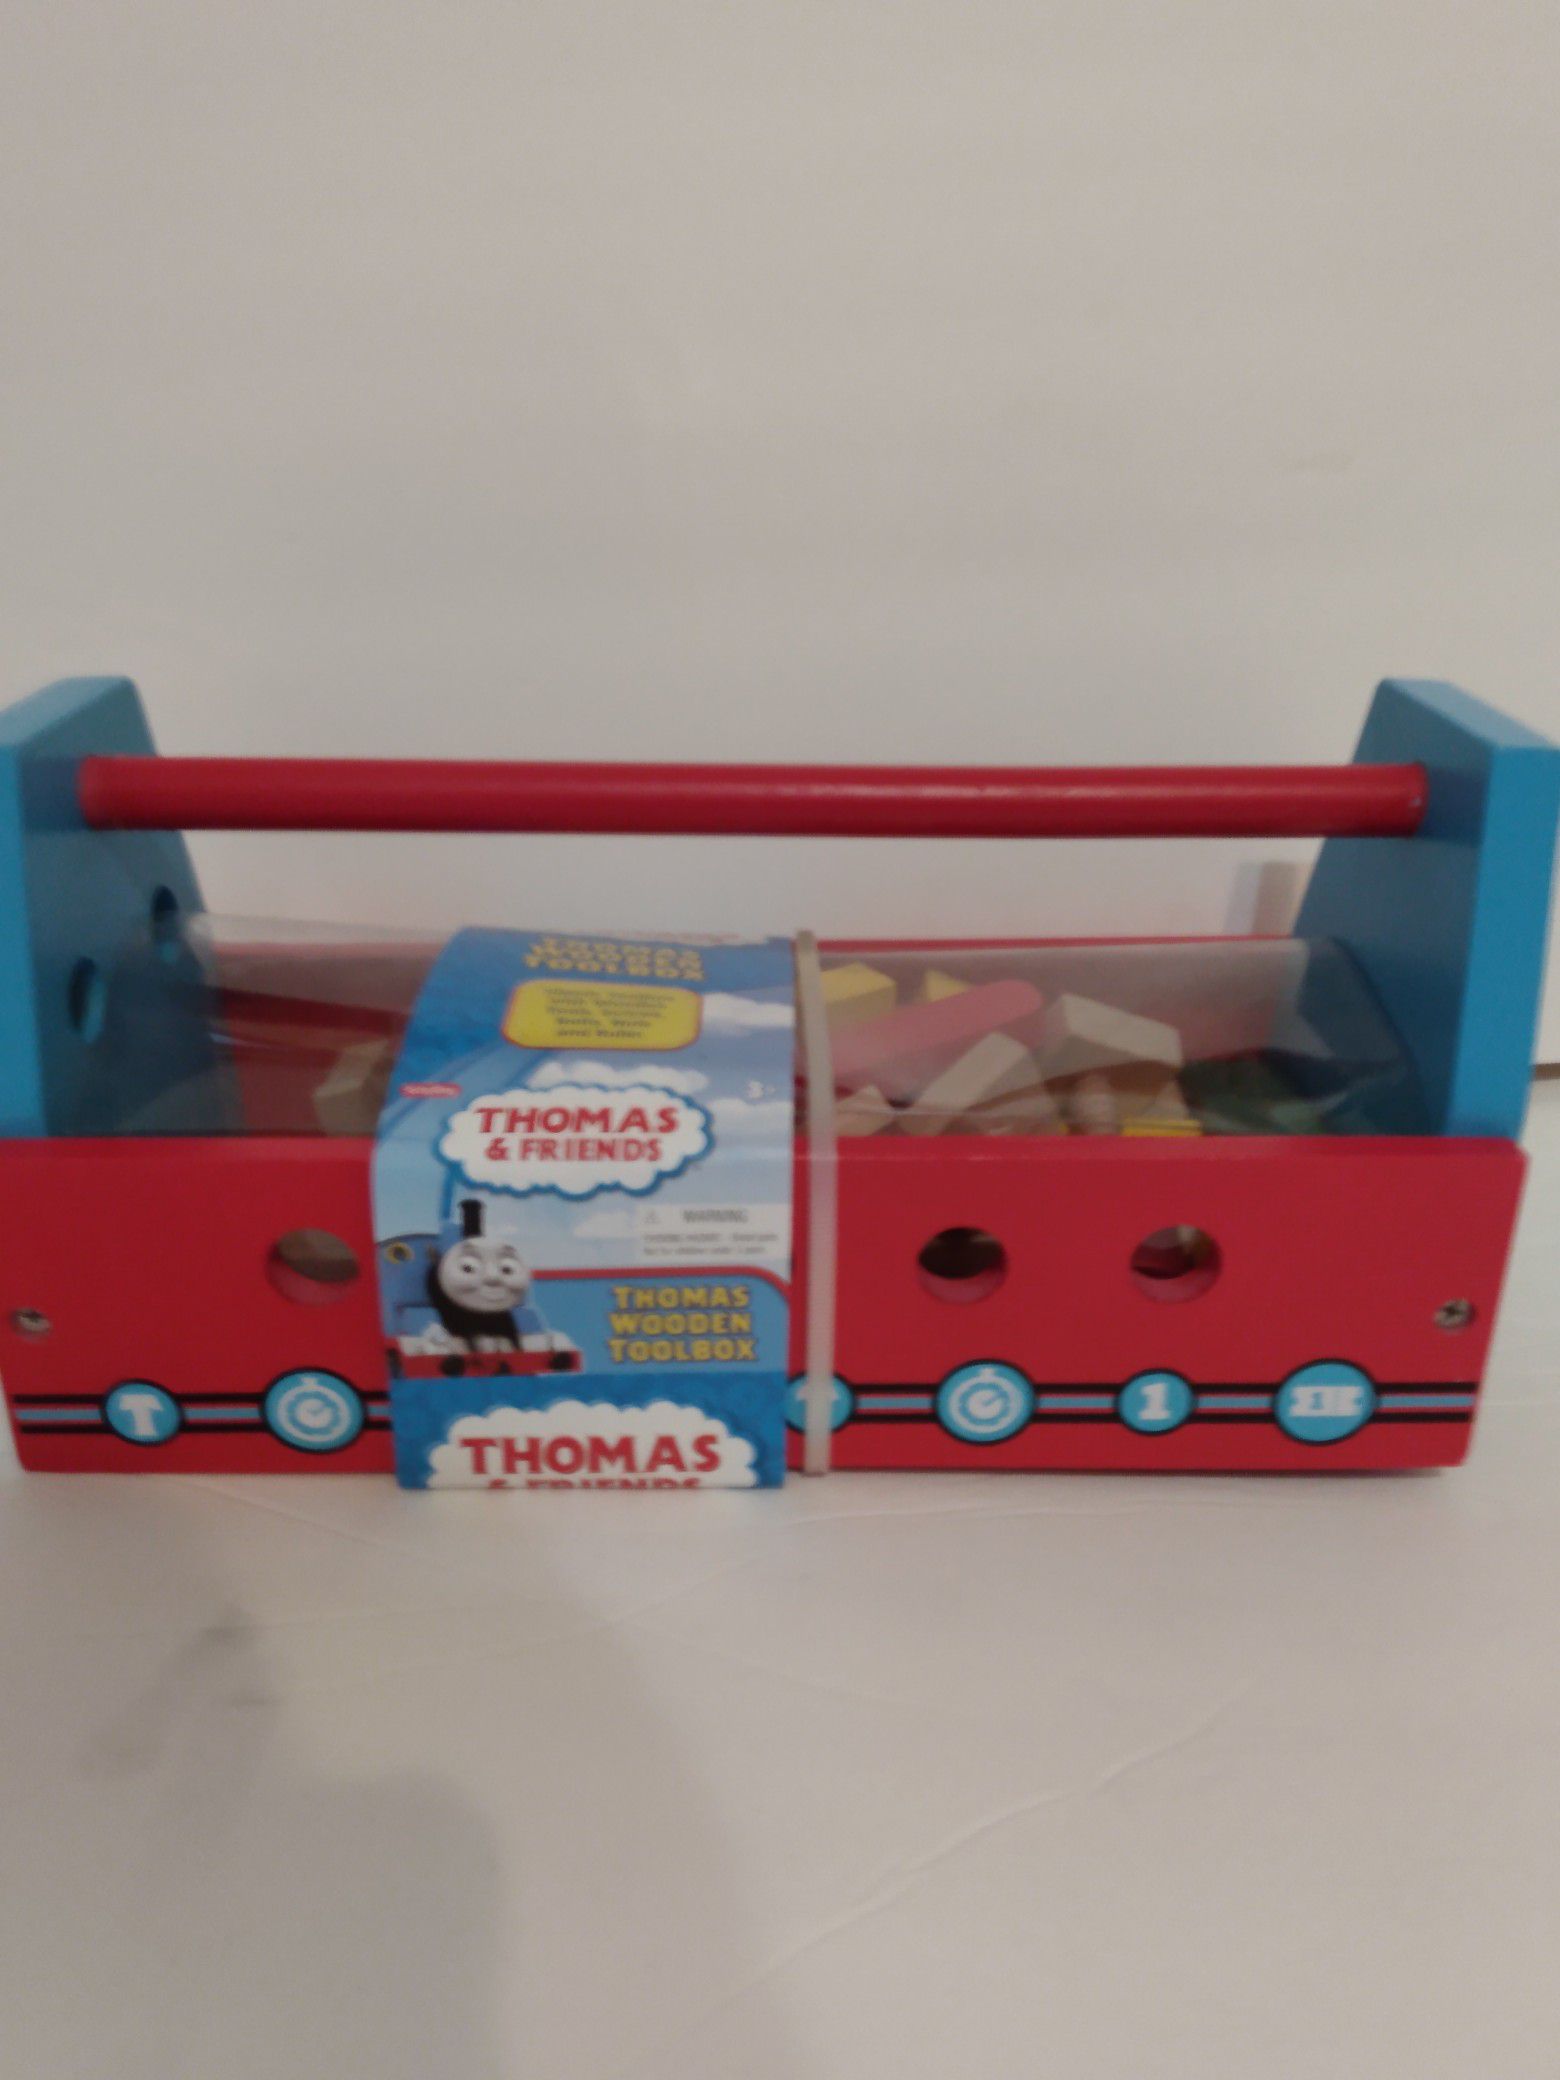 Thomas And Friend s play set